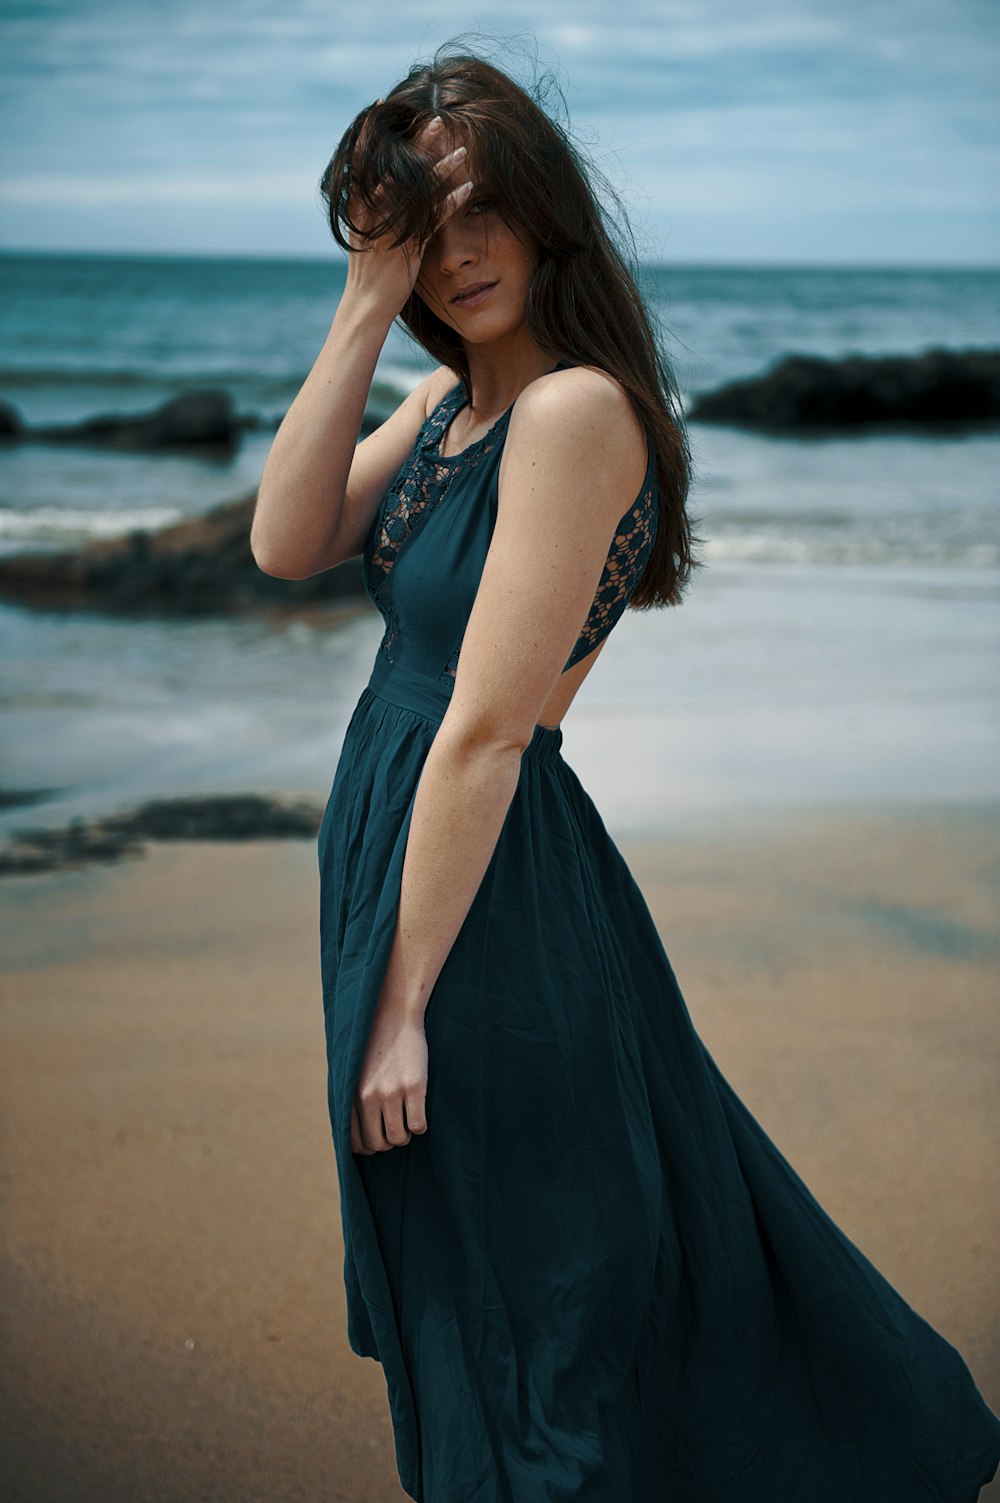 woman in blue sleeveless dress standing on beach during daytime